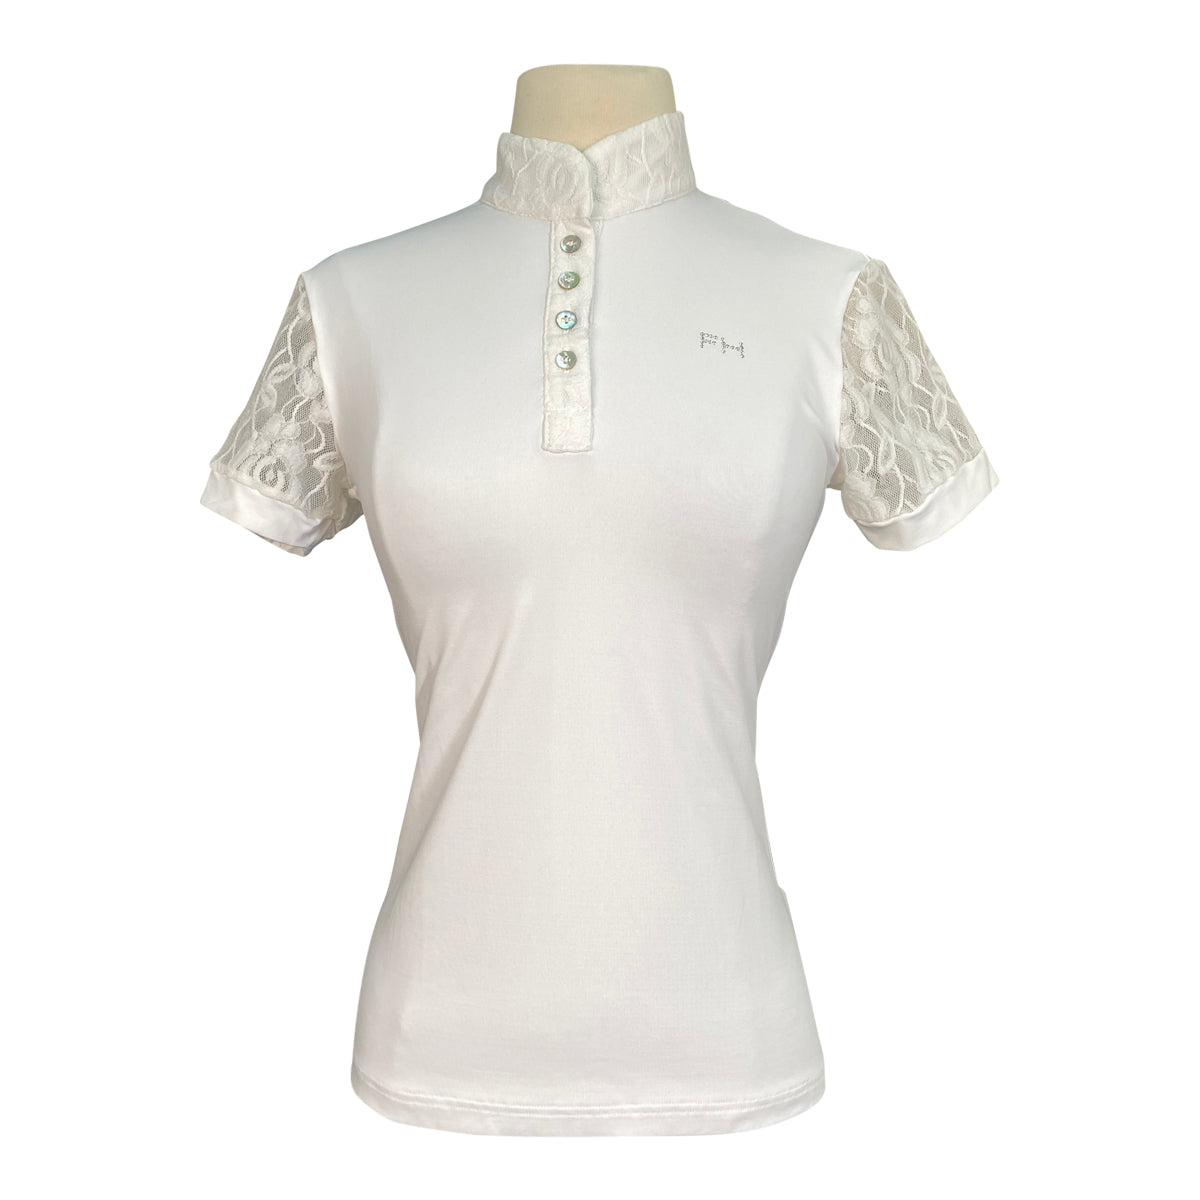 For Horses 'Stella' Show Shirt in White